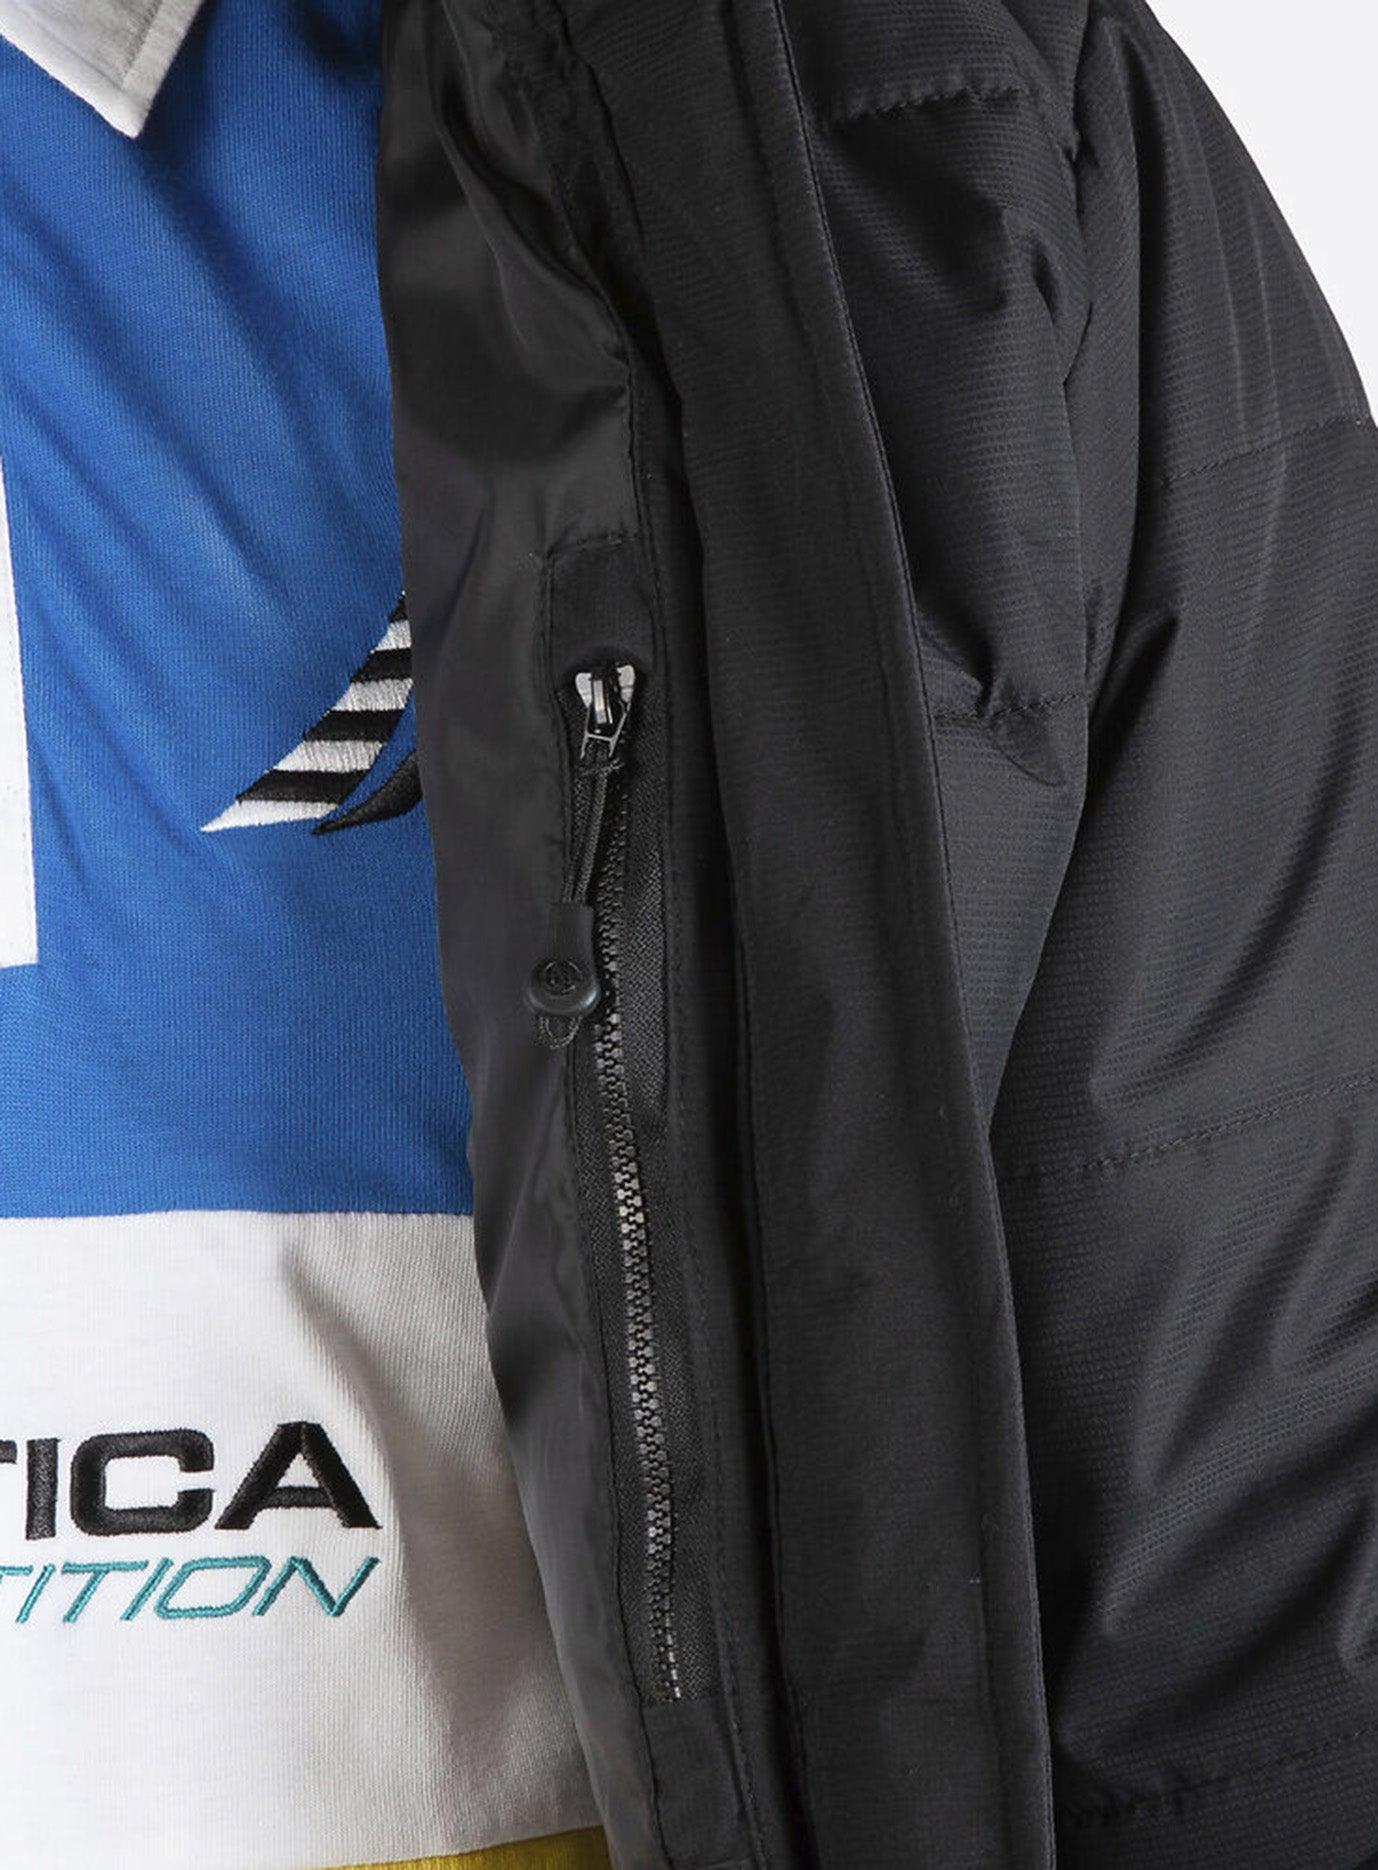 Nautica COMPETITION ANTIGUA PUFFER JACKET - Challenger Streetwear